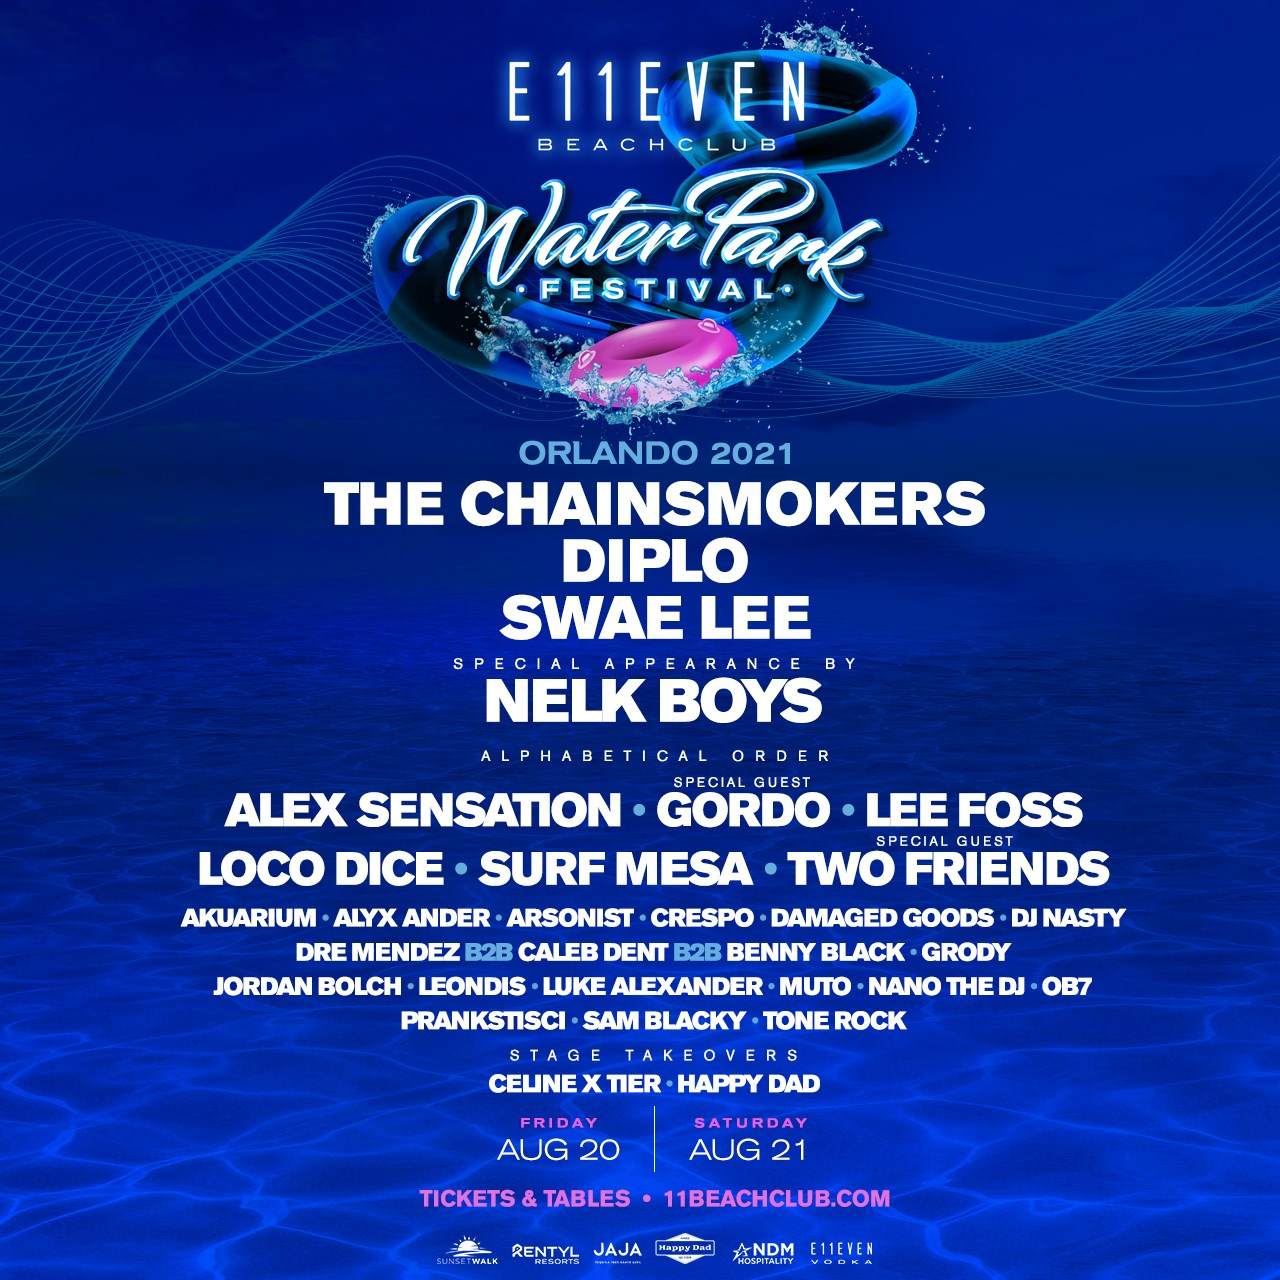 [CANCELLED] Water Park Festival Orlando - フライヤー表